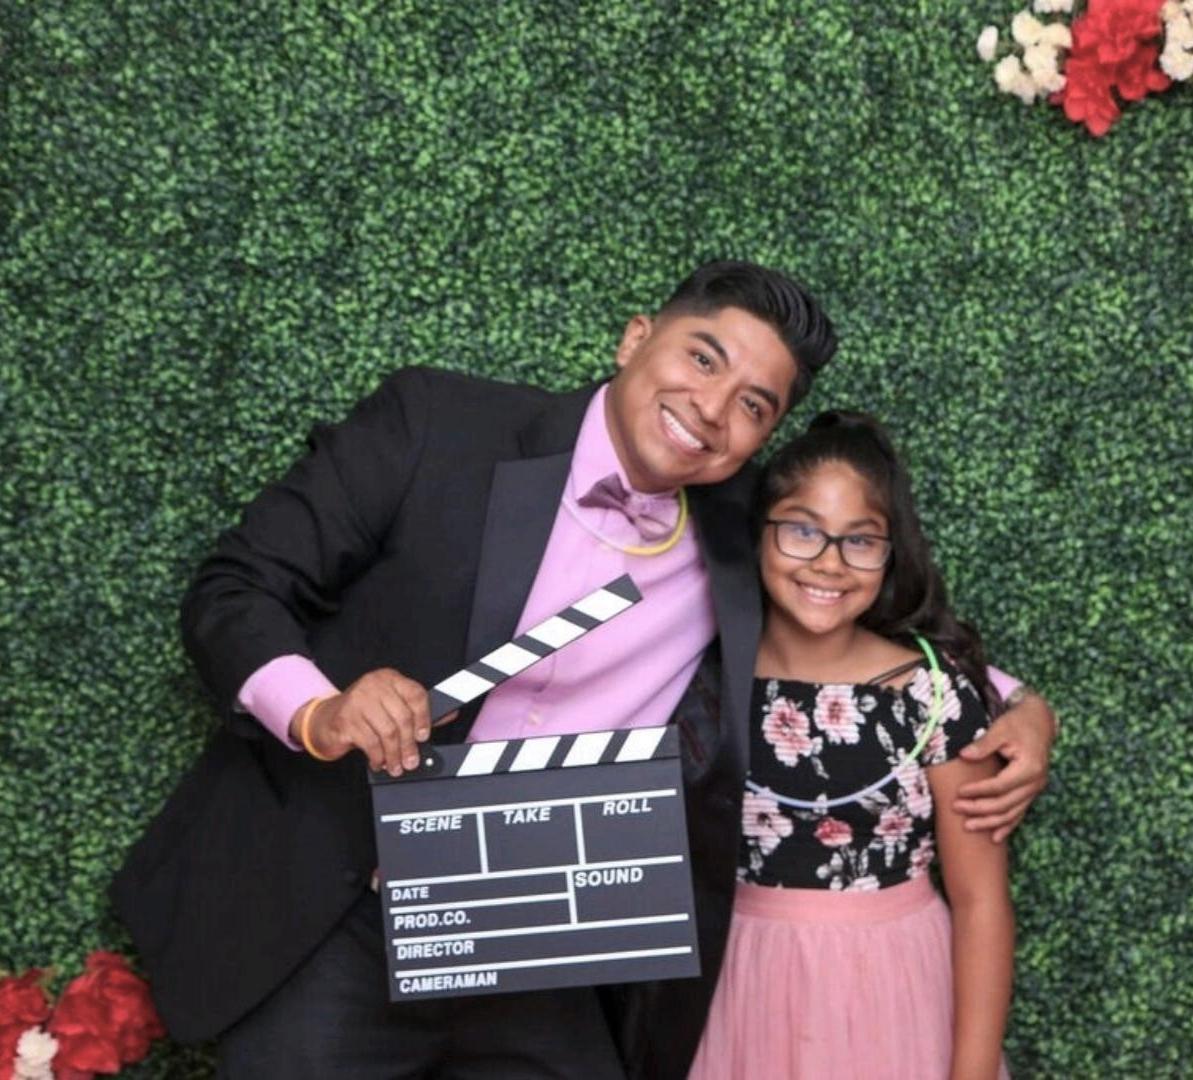 YoungSmiling Latinx father and daughter in formal attire against a natural backdrop